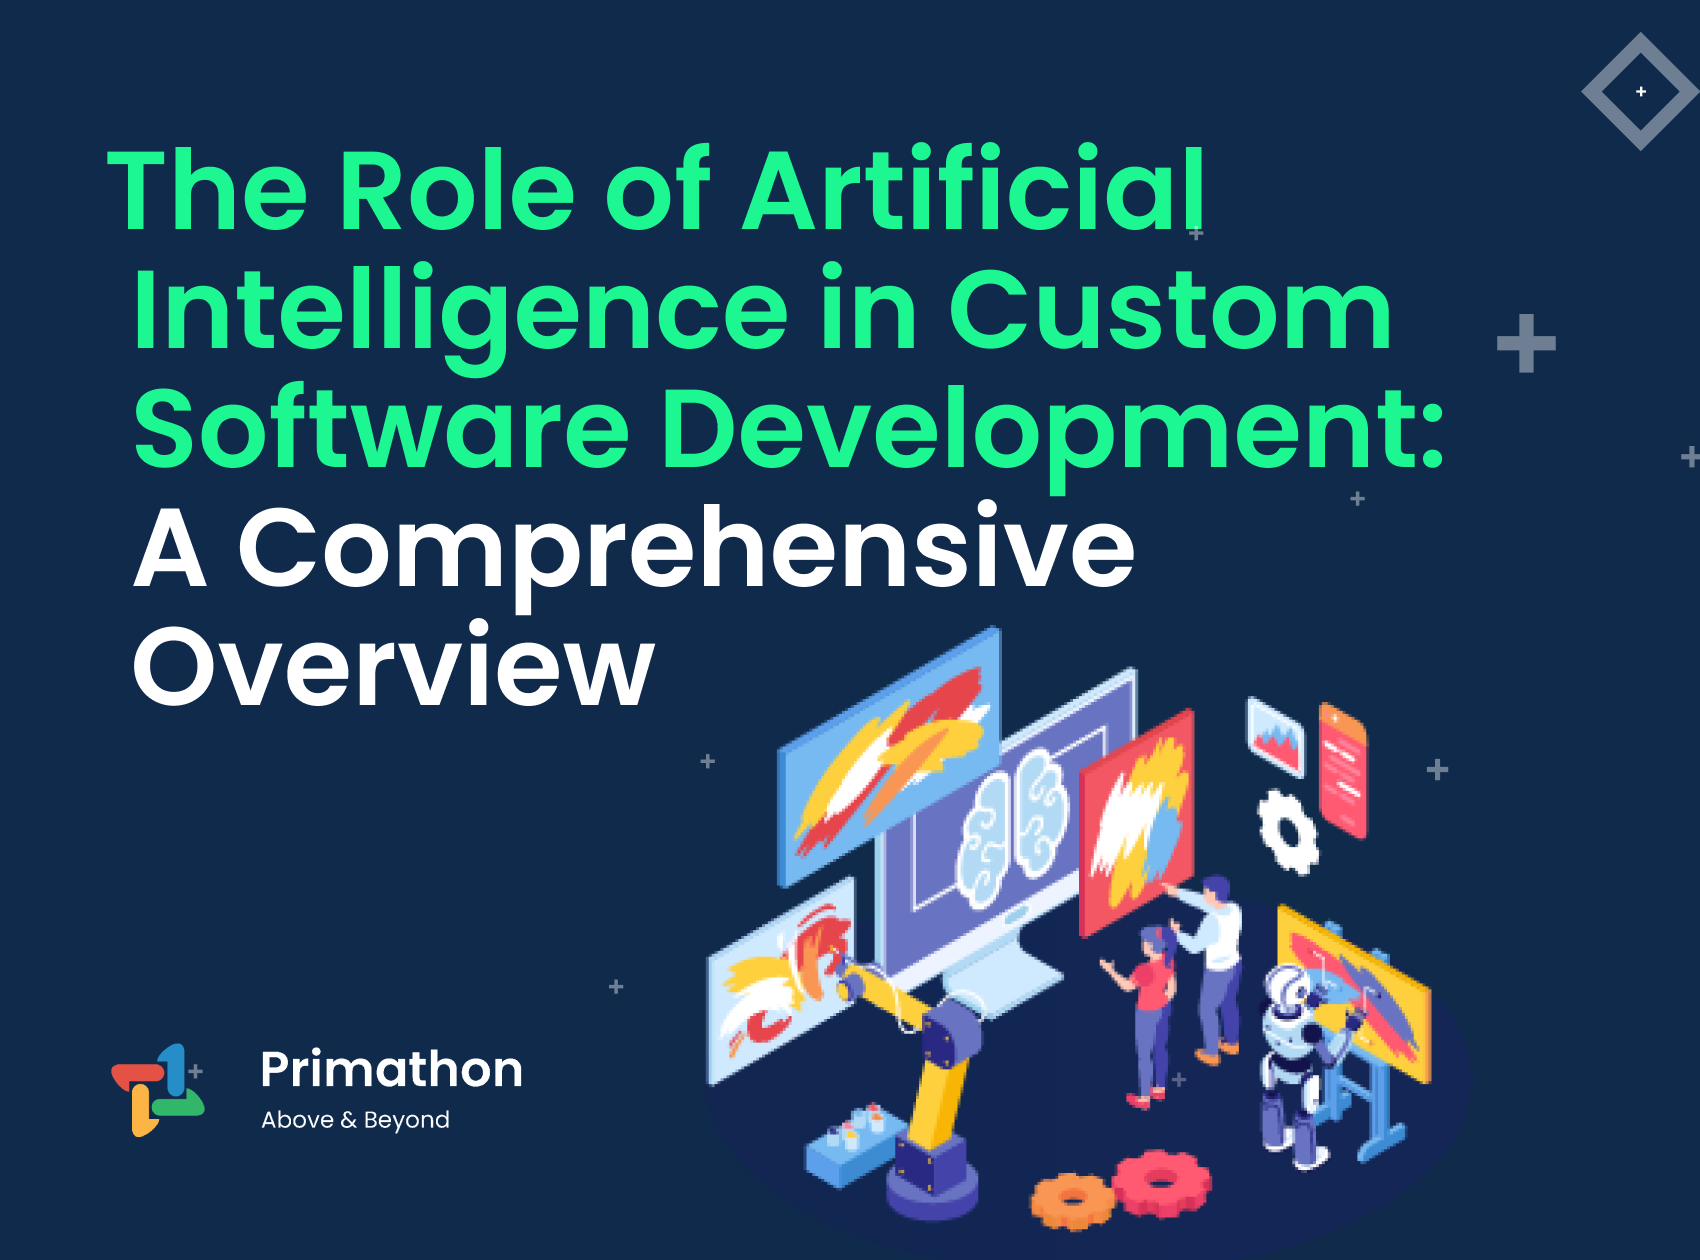 The Role of Artificial Intelligence in Custom Software Development: A Comprehensive Overview